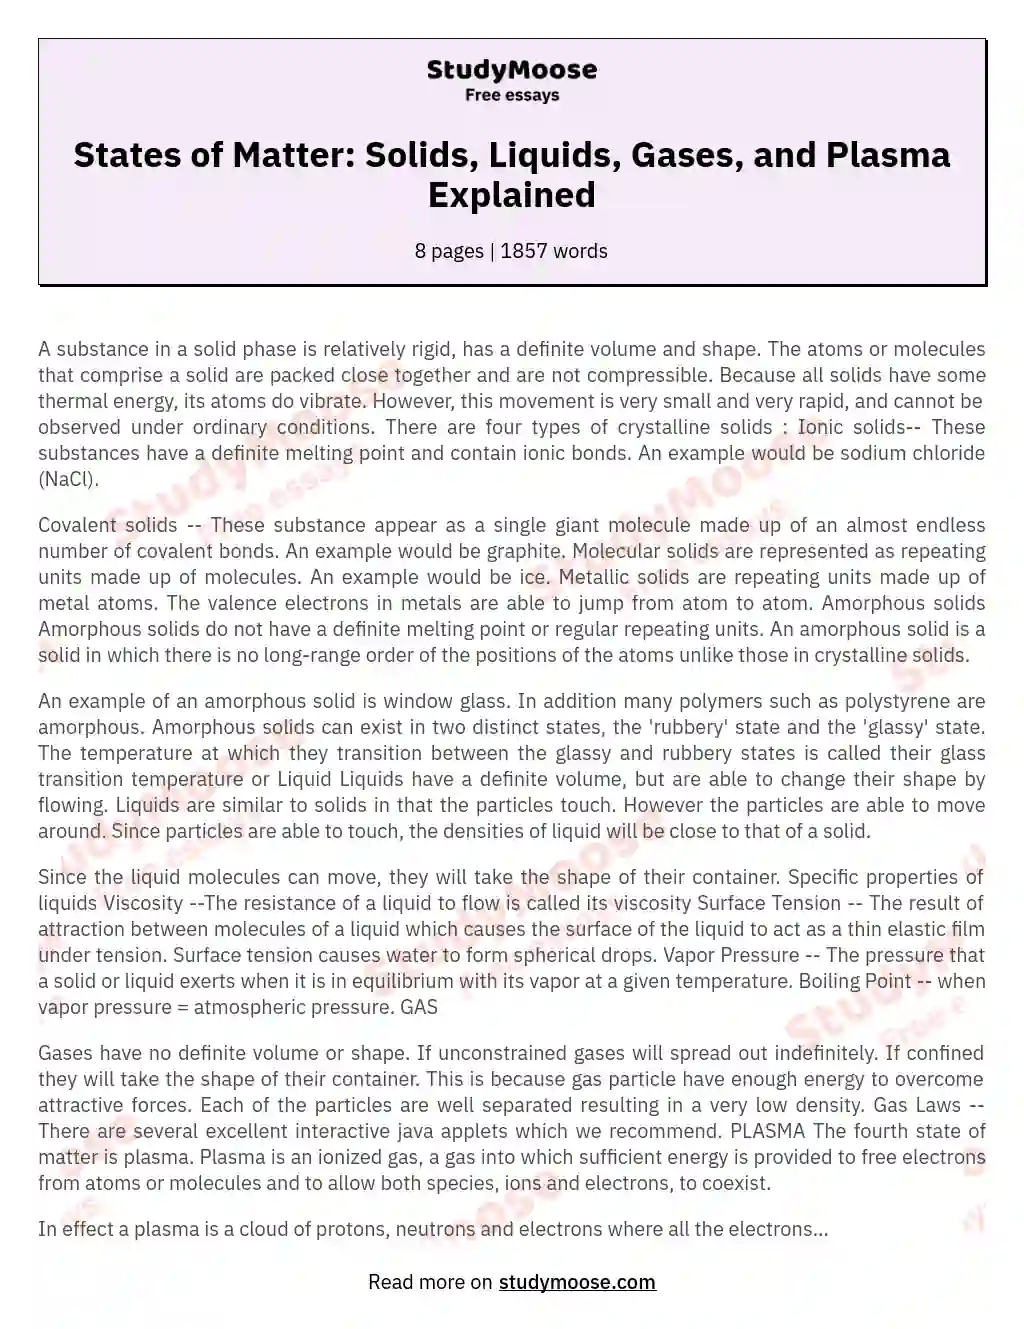 States of Matter: Solids, Liquids, Gases, and Plasma Explained essay